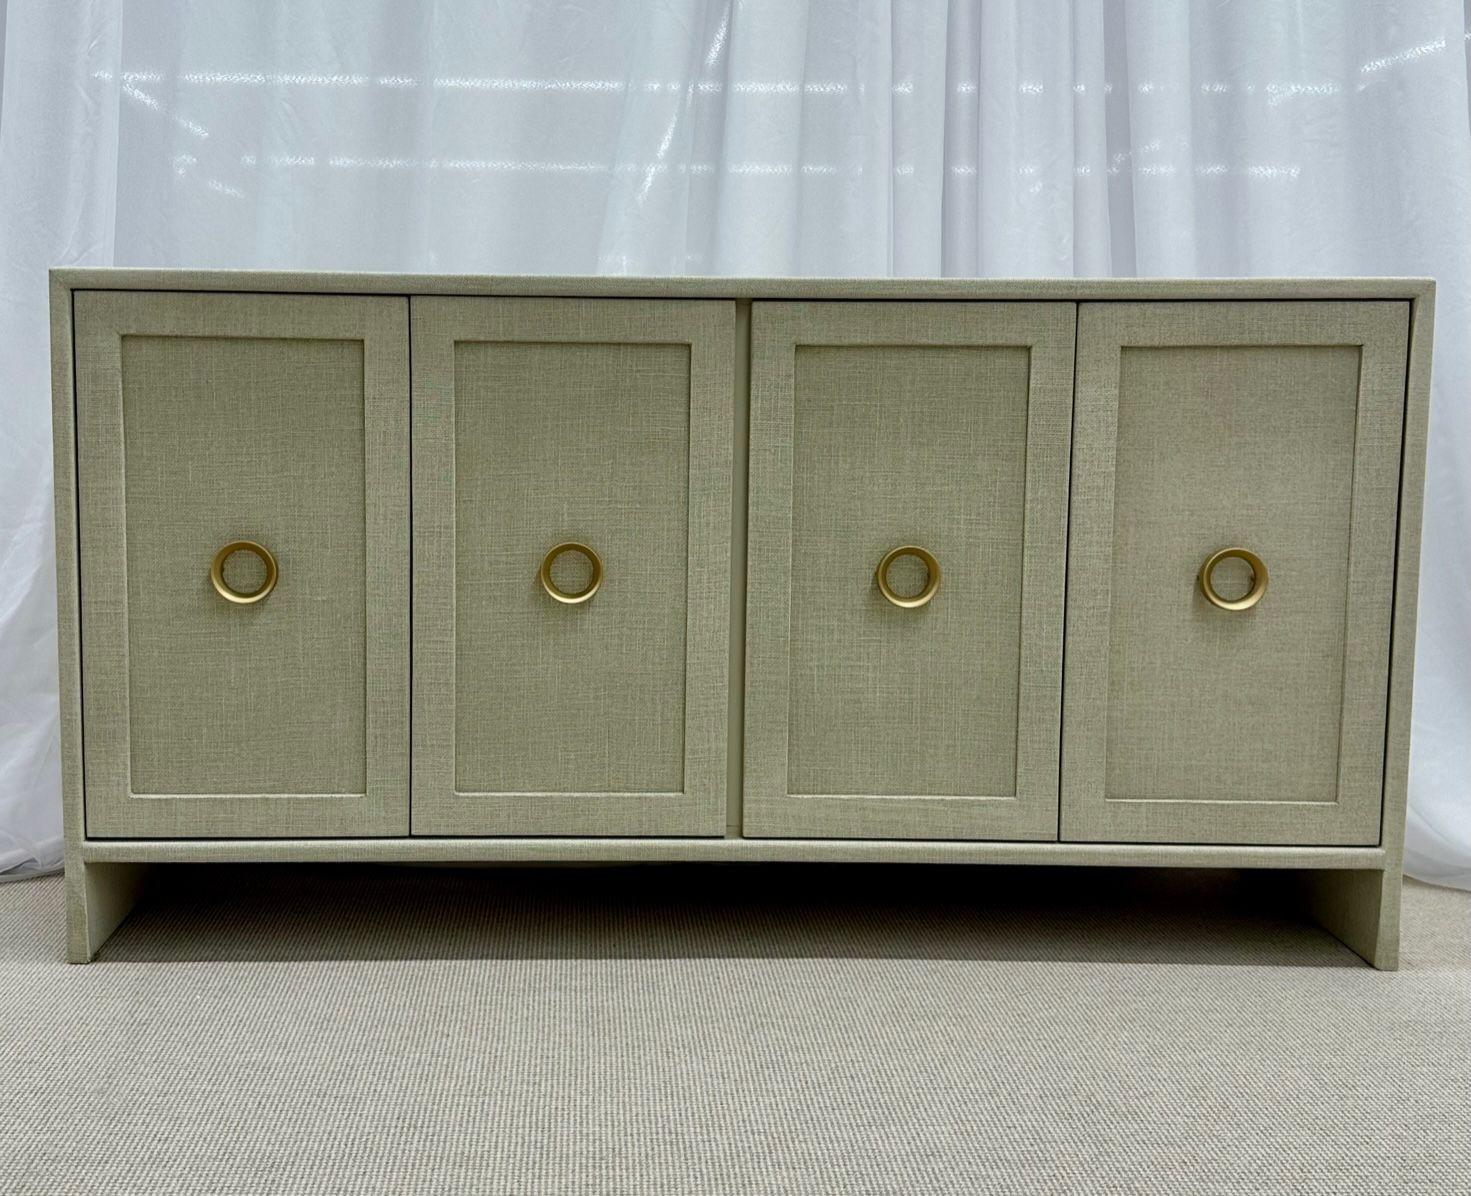 Modern white custom four door linen wrapped sideboard / credenza, brass
Contemporary decorative cabinet hand wrapped in linen and given a multi-layered paint glaze in a neutral oyster color. Having two pairs of double doors that open to shelving;